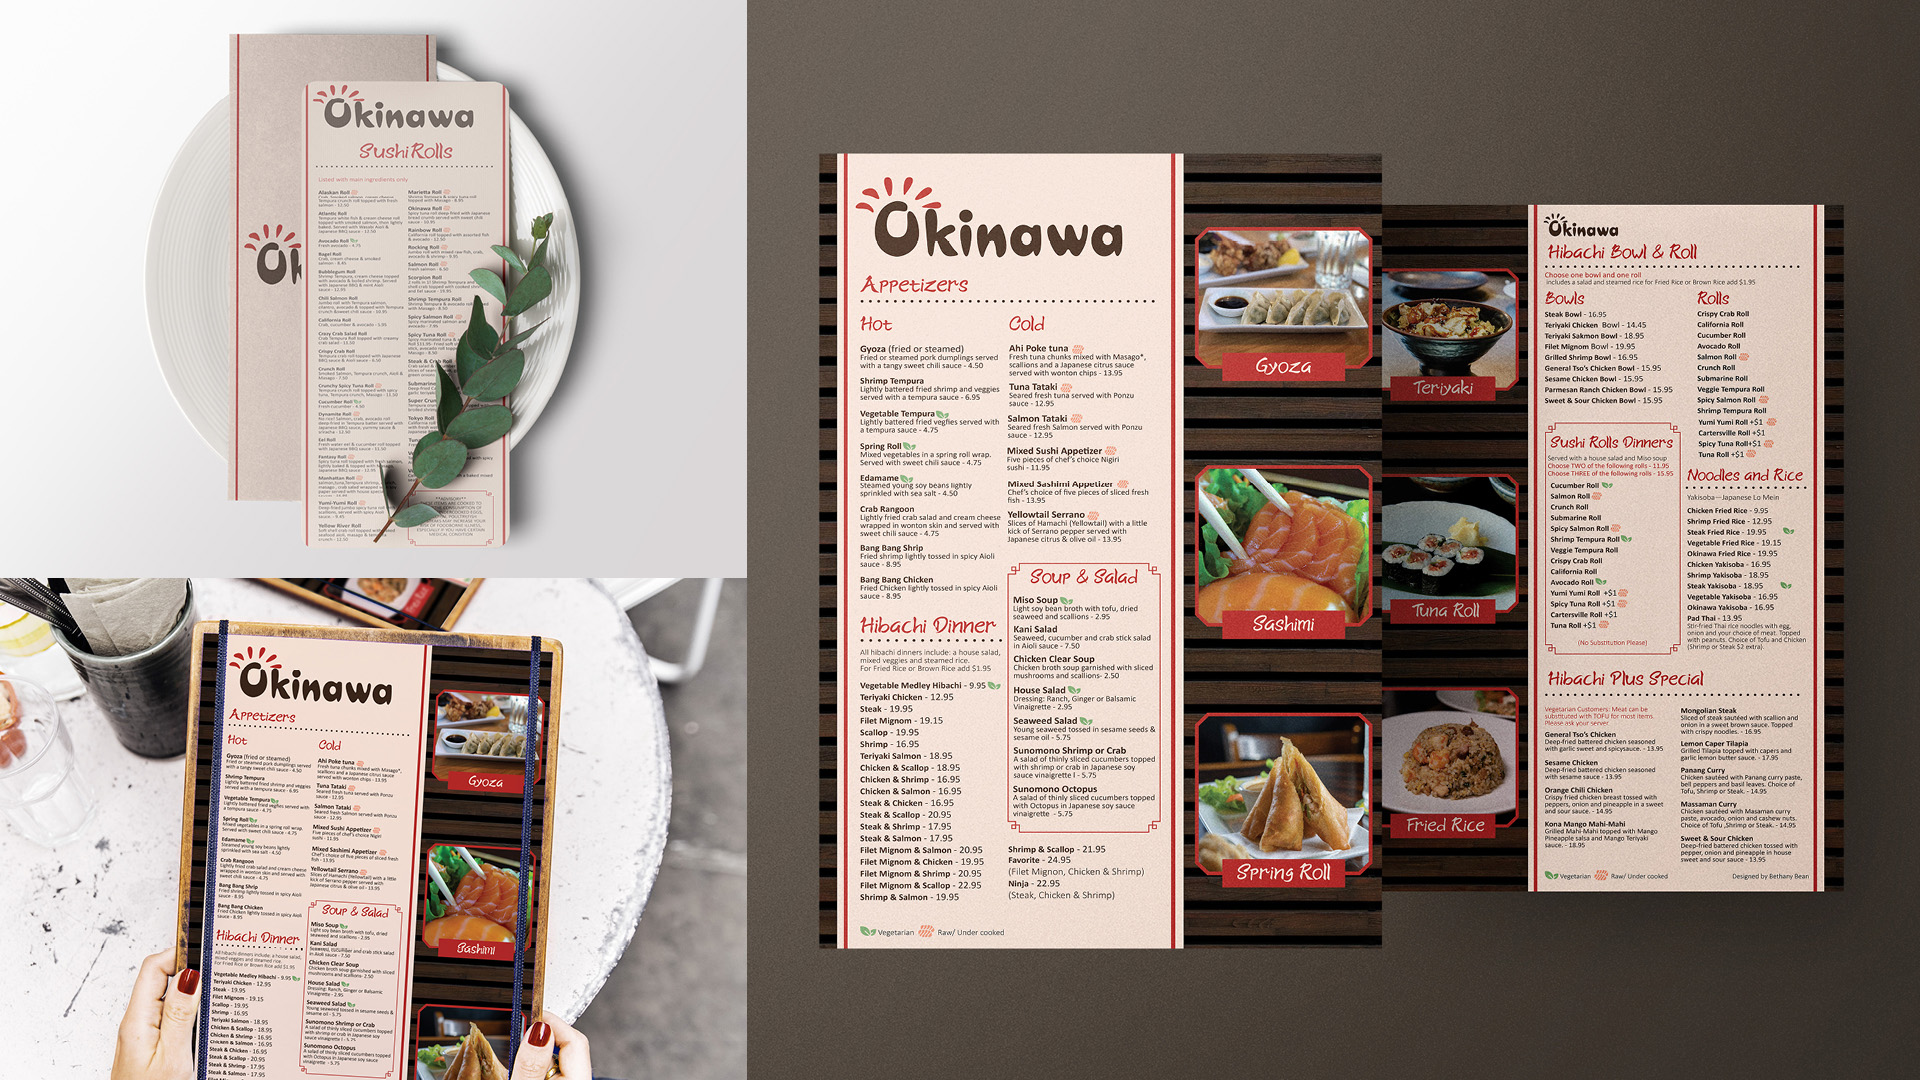 Okinawa Menu / Okinawa Menu,menu, 11 x 17 inches printed menu, 2023. This is a redesign of the Japanese restaurant Okinawa's menu. It was designed to better match the restaurant's atmosphere and condense the menu to fewer pages.